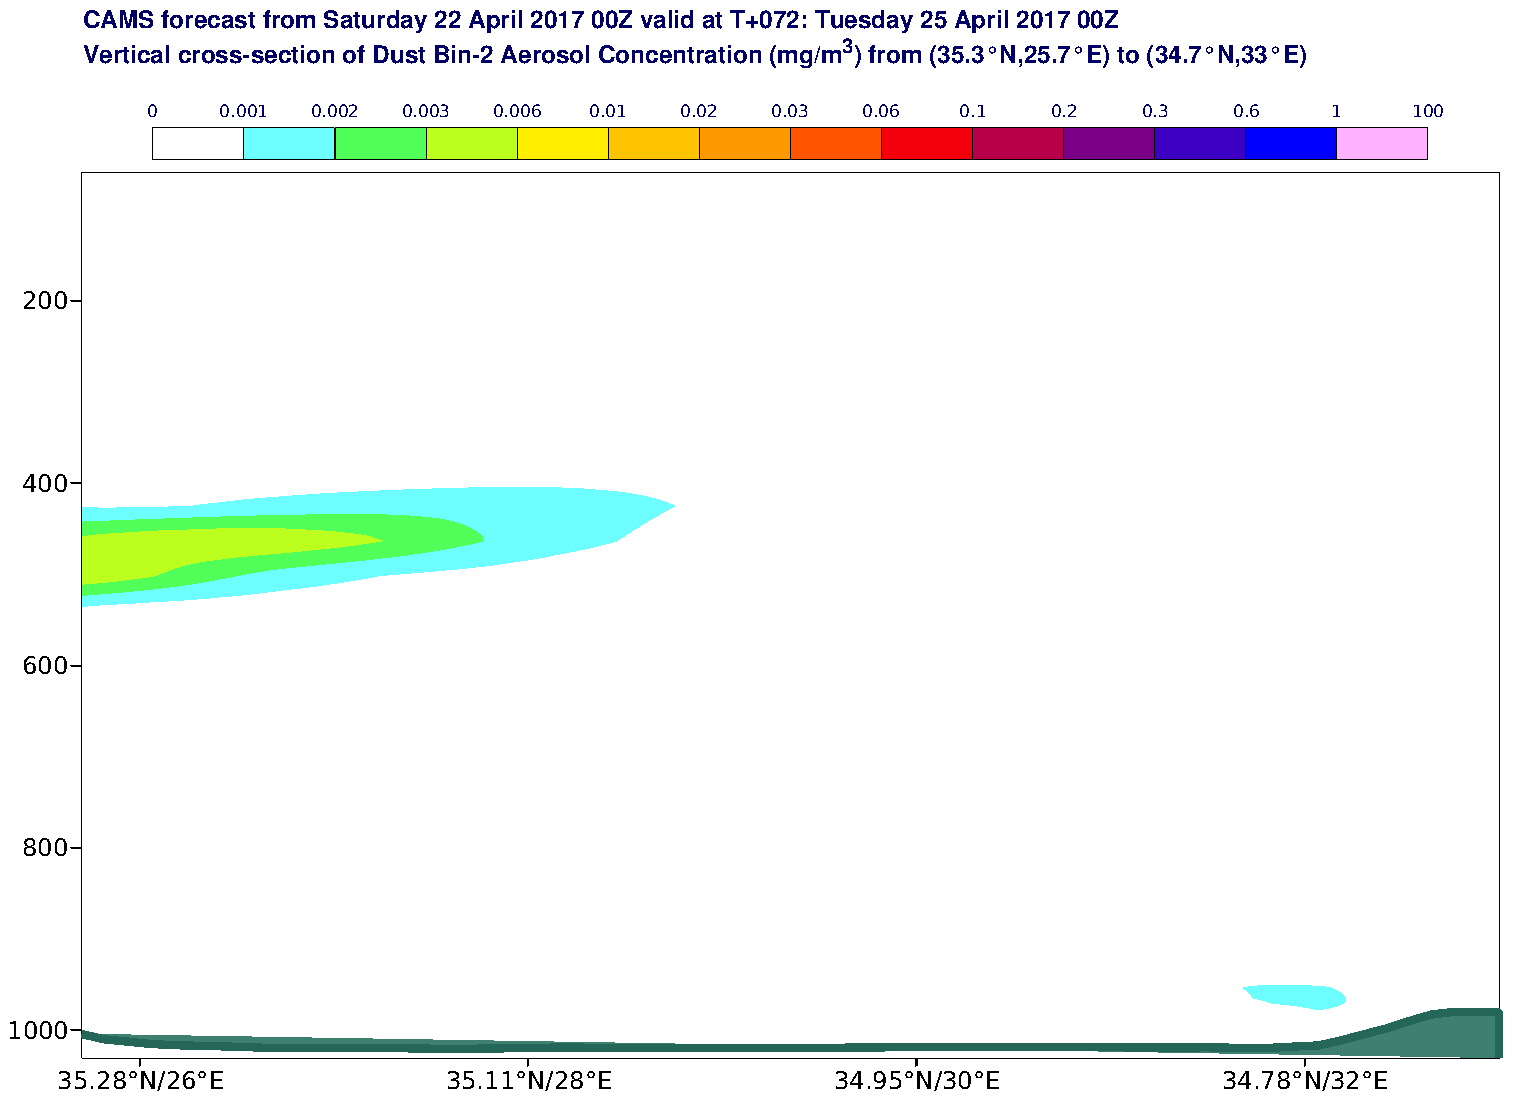 Vertical cross-section of Dust Bin-2 Aerosol Concentration (mg/m3) valid at T72 - 2017-04-25 00:00